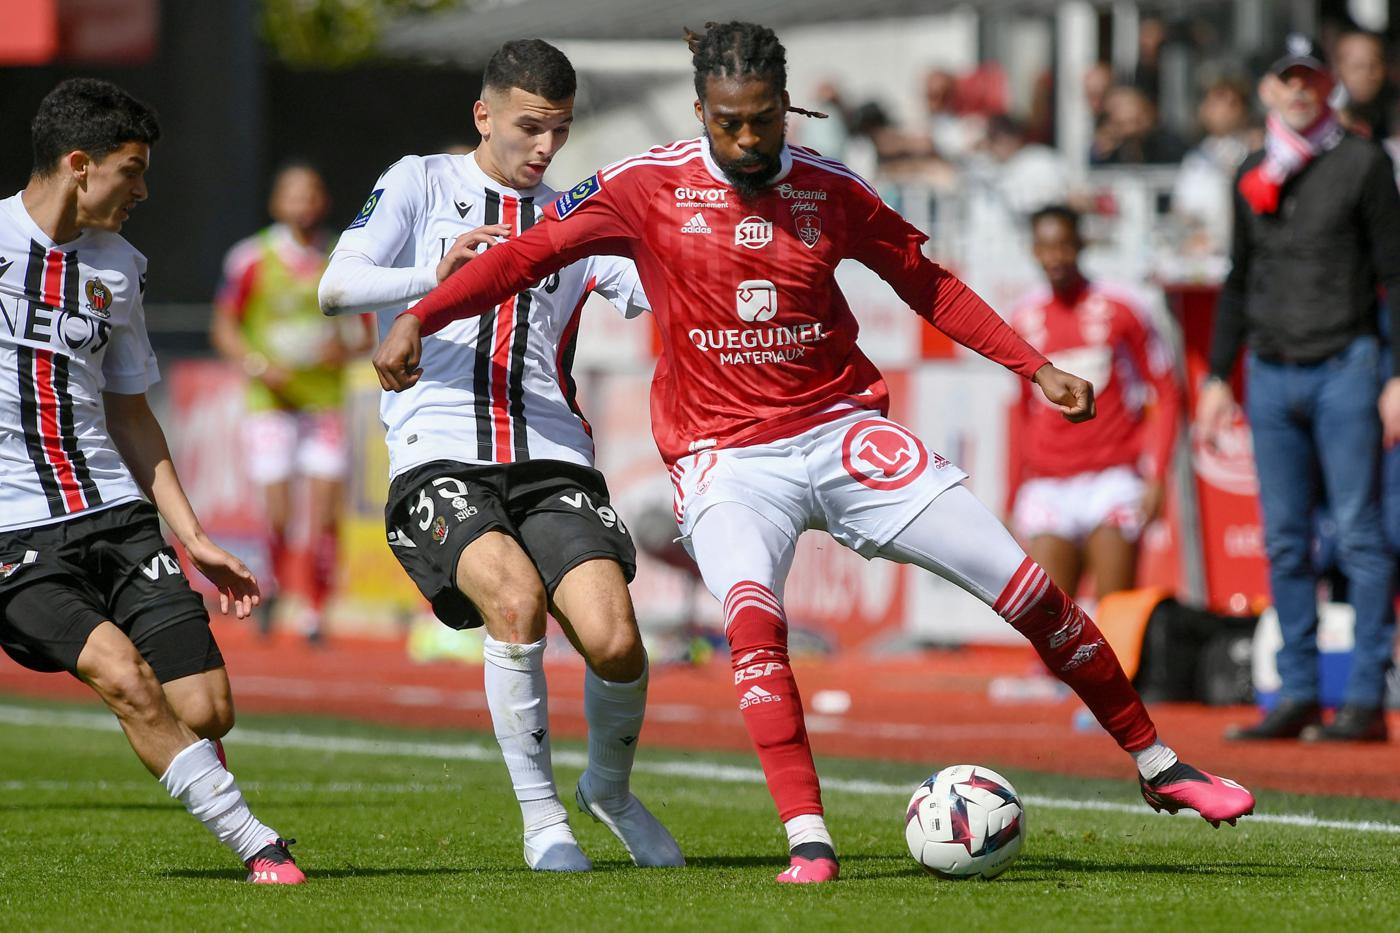 Brest - Nice - 1:0. French Championship, round 31. Overview of the match,